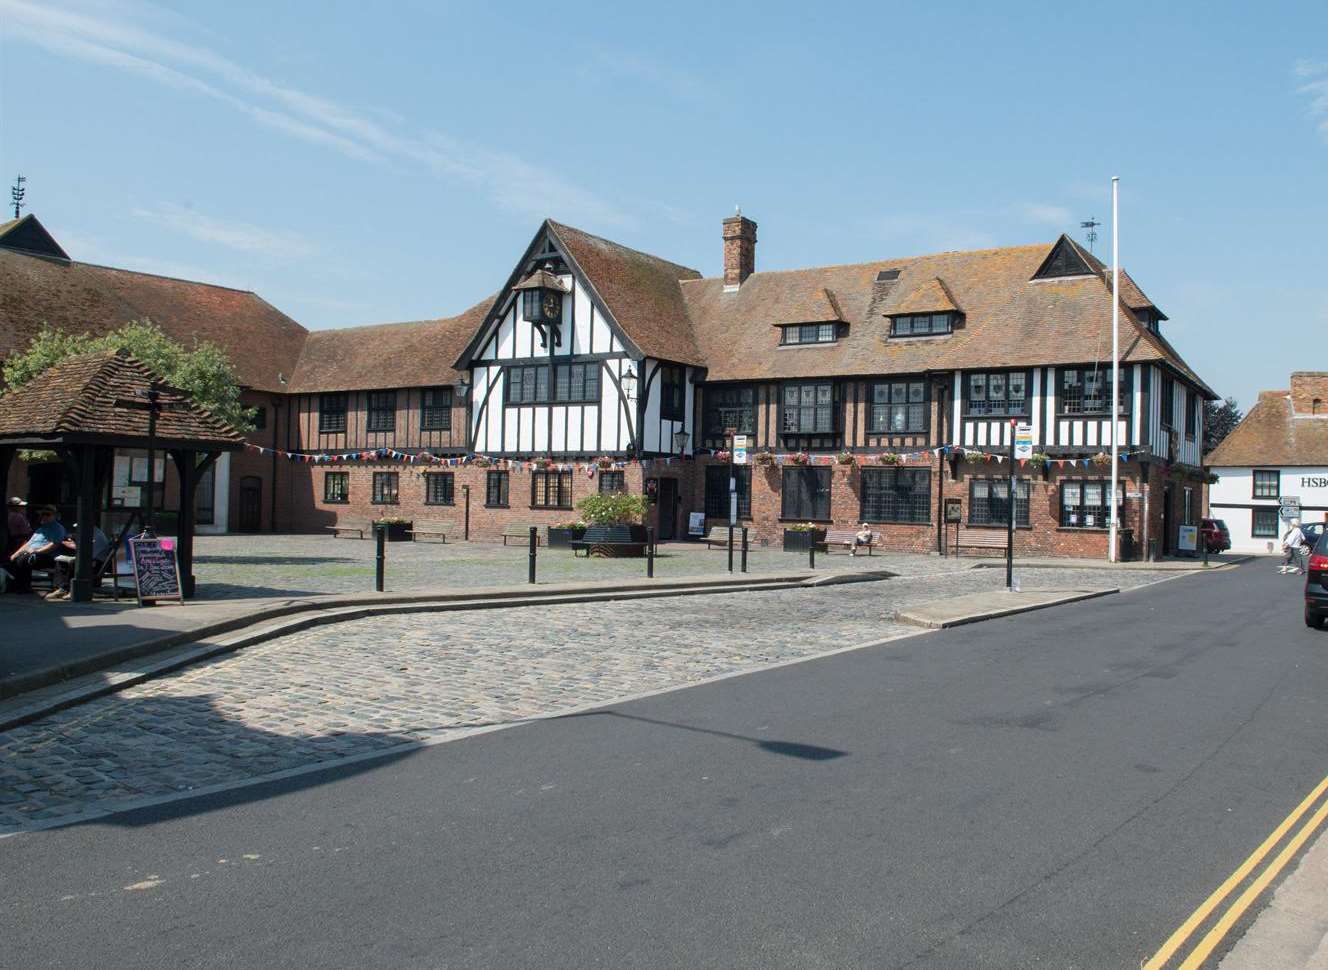 The inquest was held at the Guildhall in Sandwich